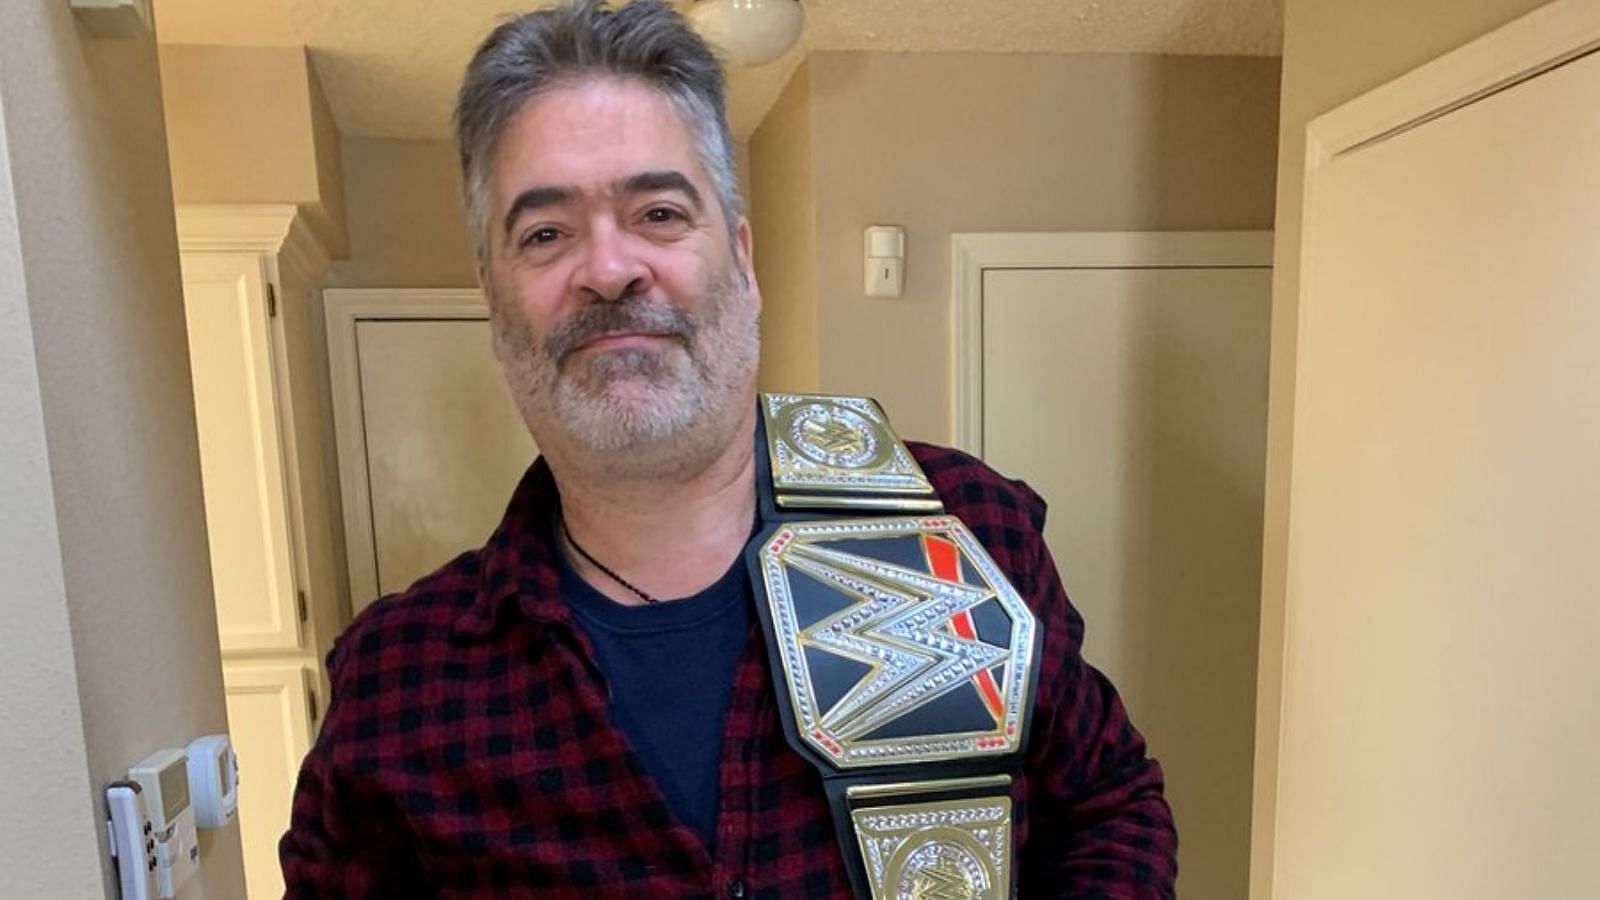 Vince Russo is a former WWE head writer